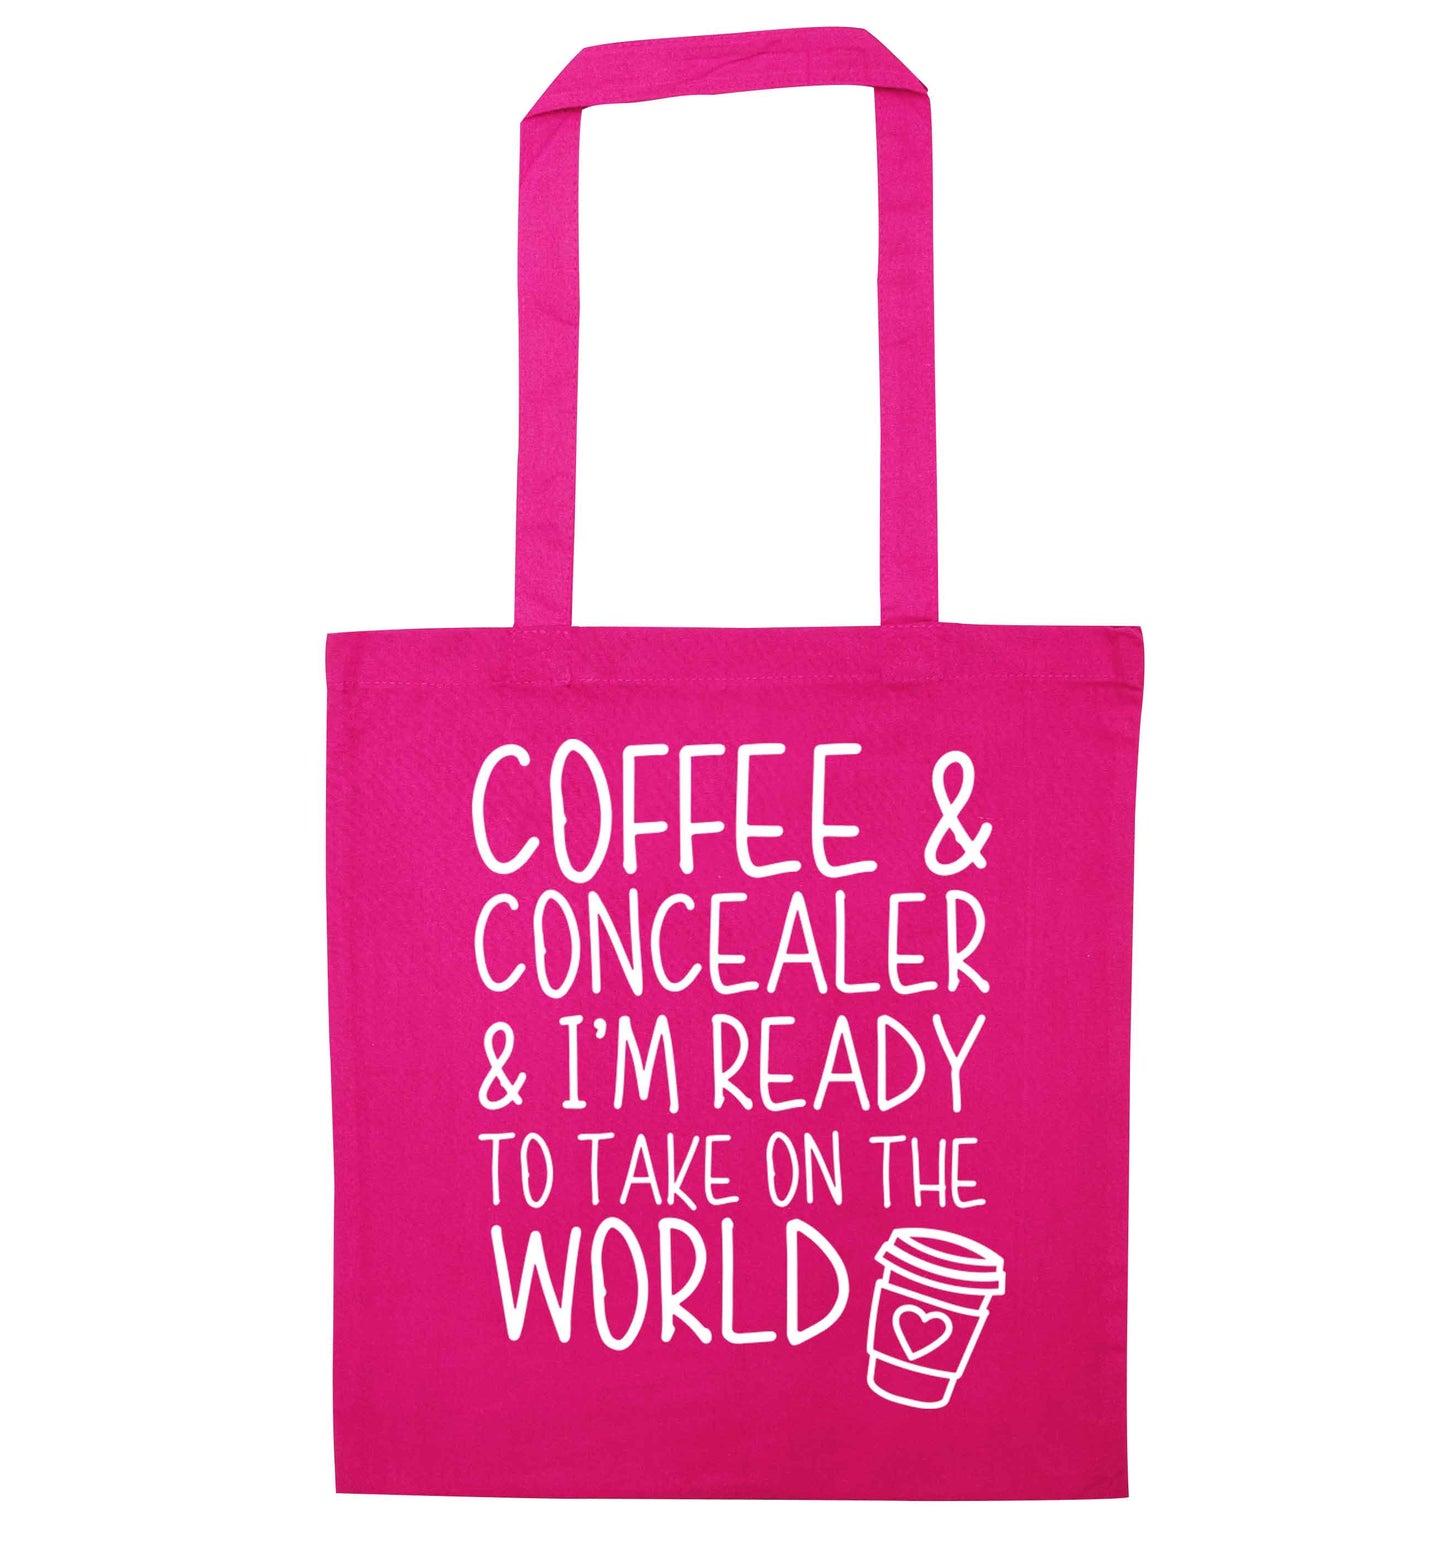 Coffee and concealer and I'm ready to take on the world pink tote bag